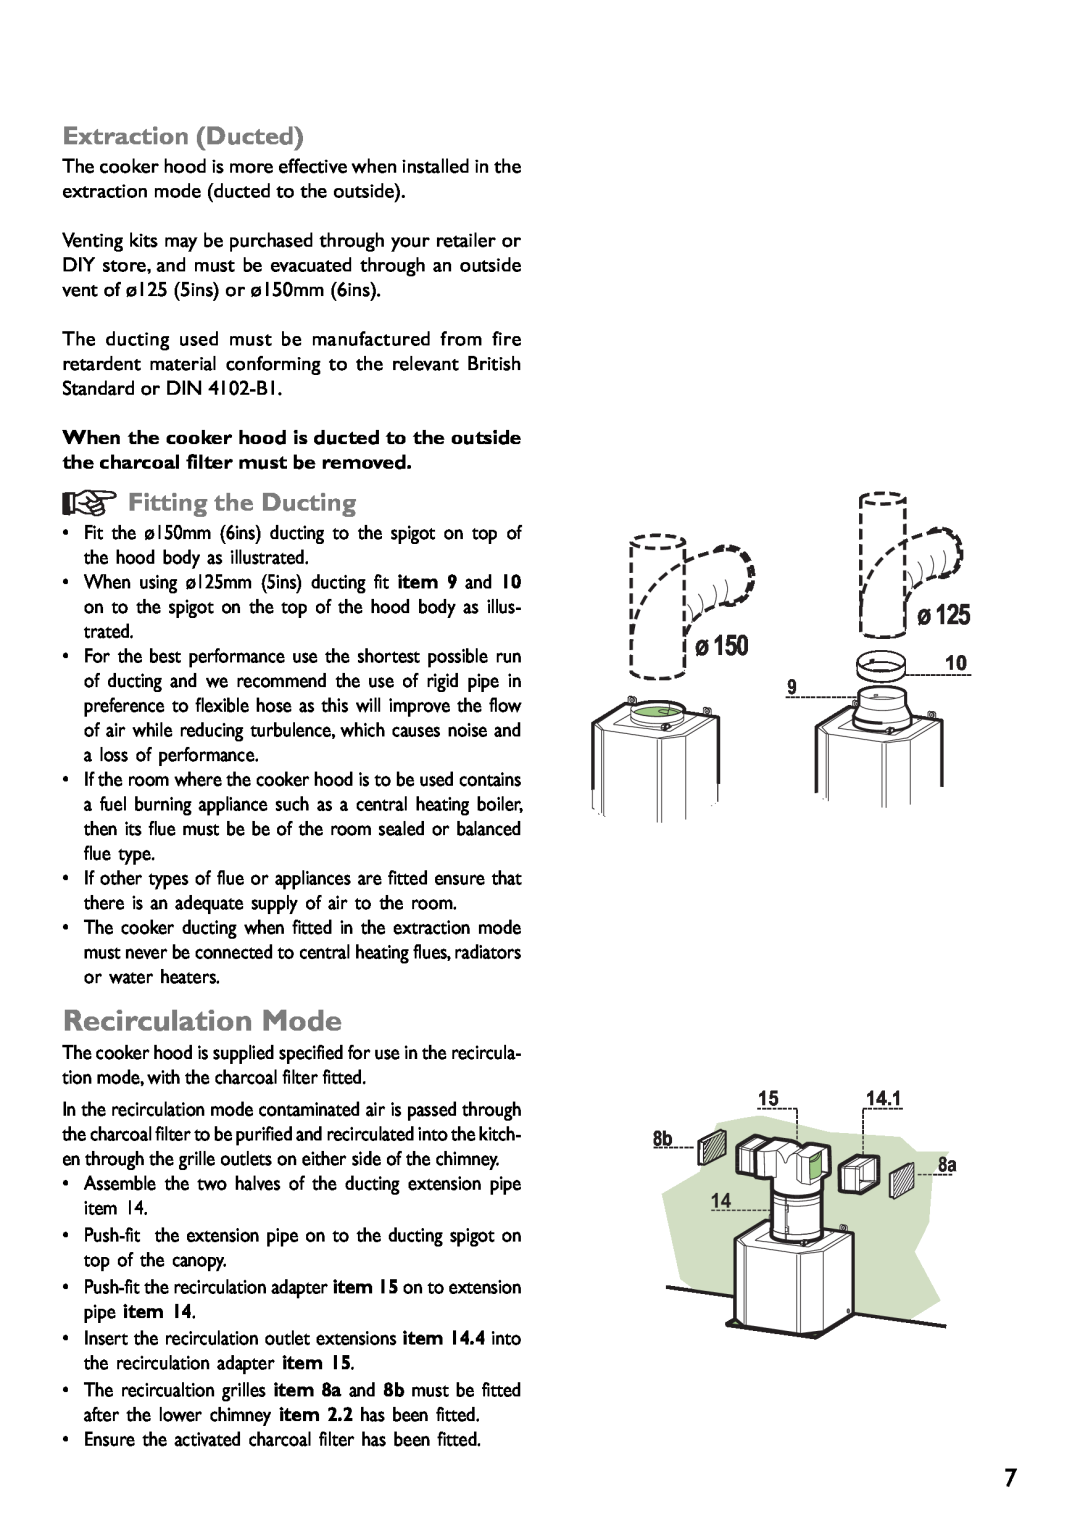 John Lewis JLBIHD904, JLBIHD603 instruction manual Extraction Ducted, Fitting the Ducting, Recirculation Mode, 15 8b 8a 